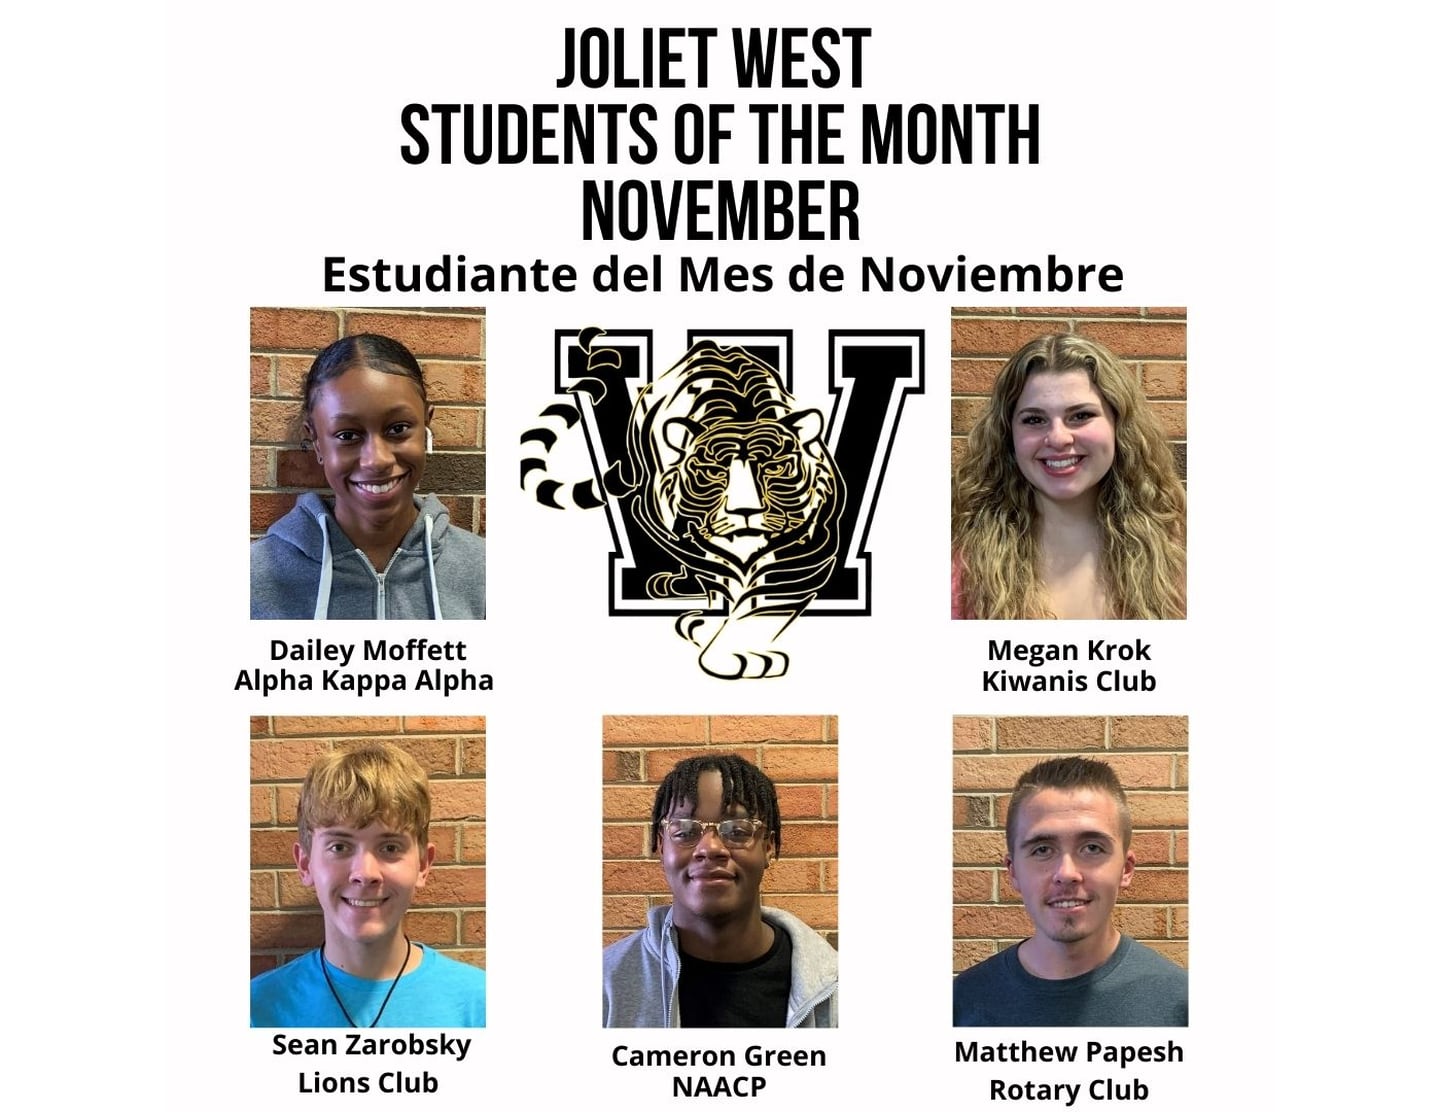 The Joliet West High School Students of the Month for November are Megan Krok, Kiwanis; Sean Zarobsky, Lions; Matthew Papesh, Rotary; Cameron Green, NAACP; and Dailey Moffett, Alpha Kappa Alpha.